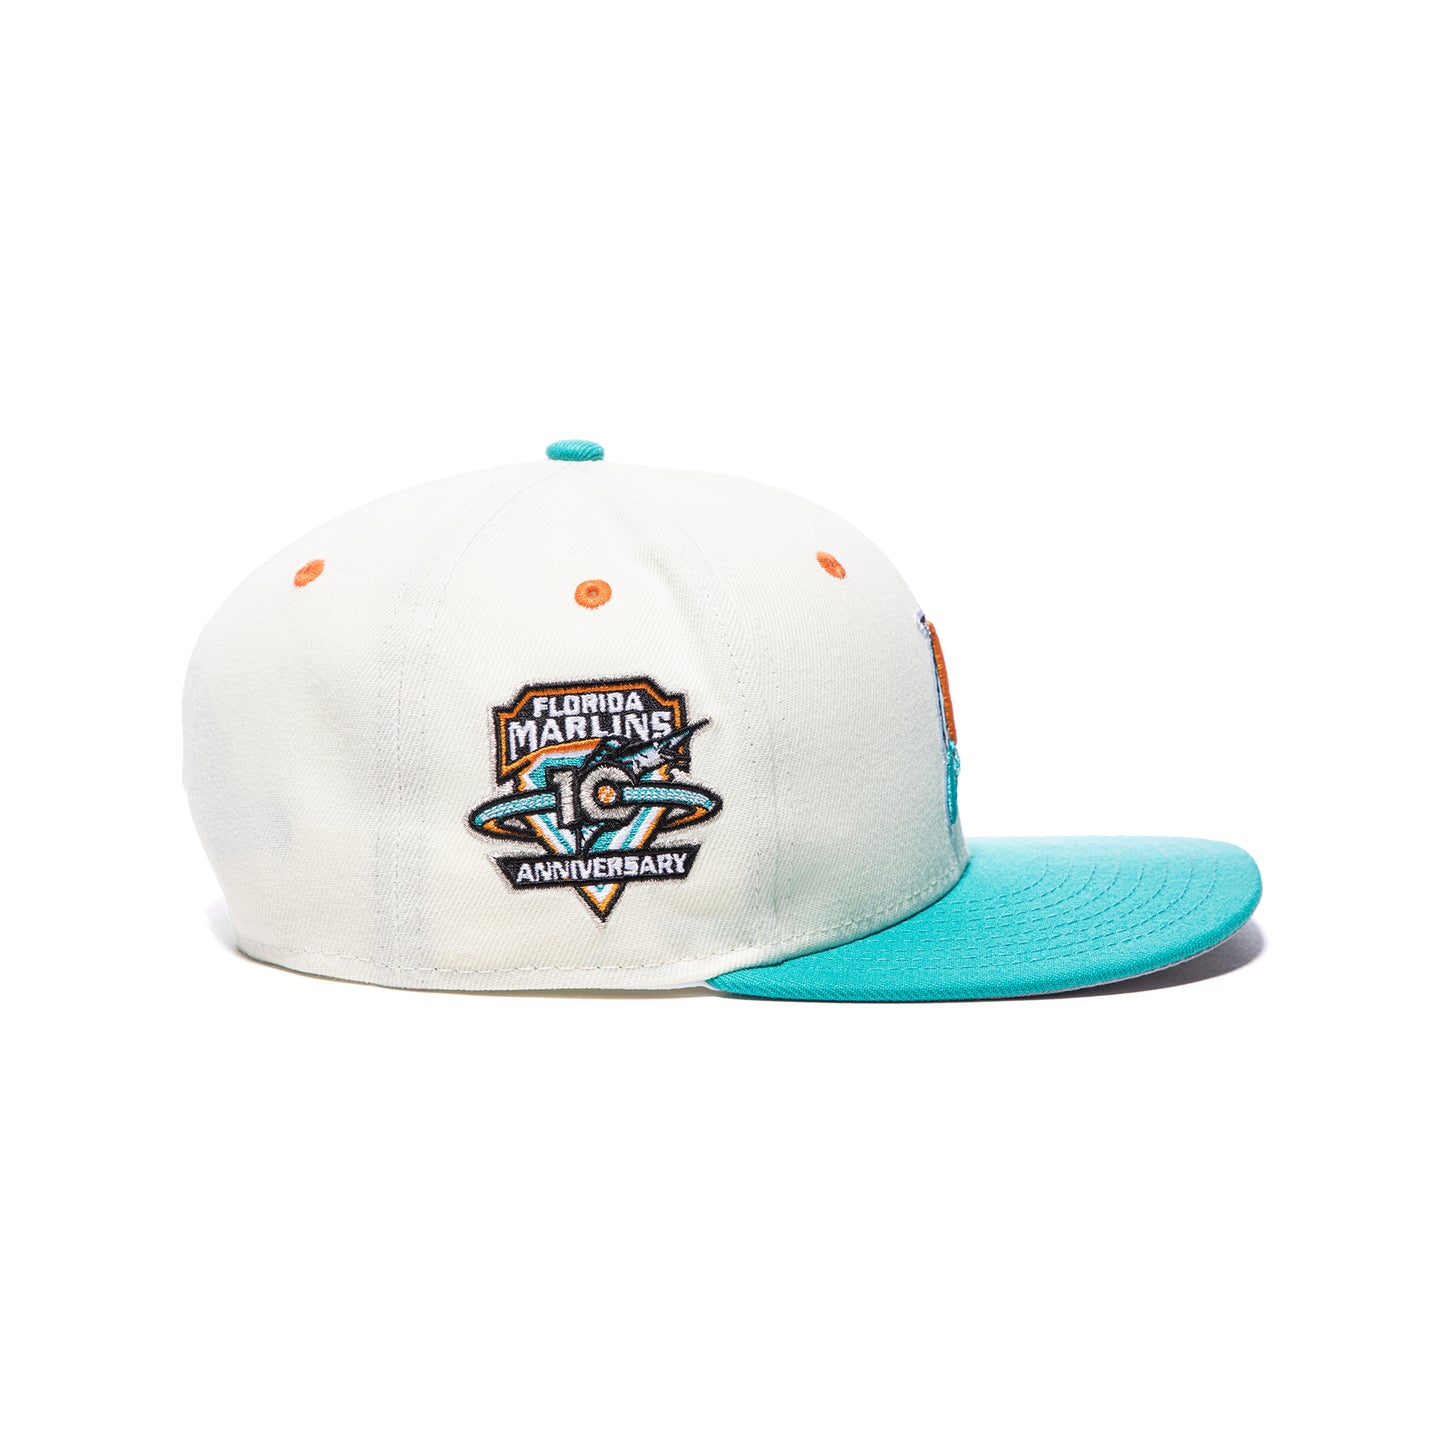 Concepts x New Era 5950 Florida Marlins Fitted Hat (Chrome/Teal)